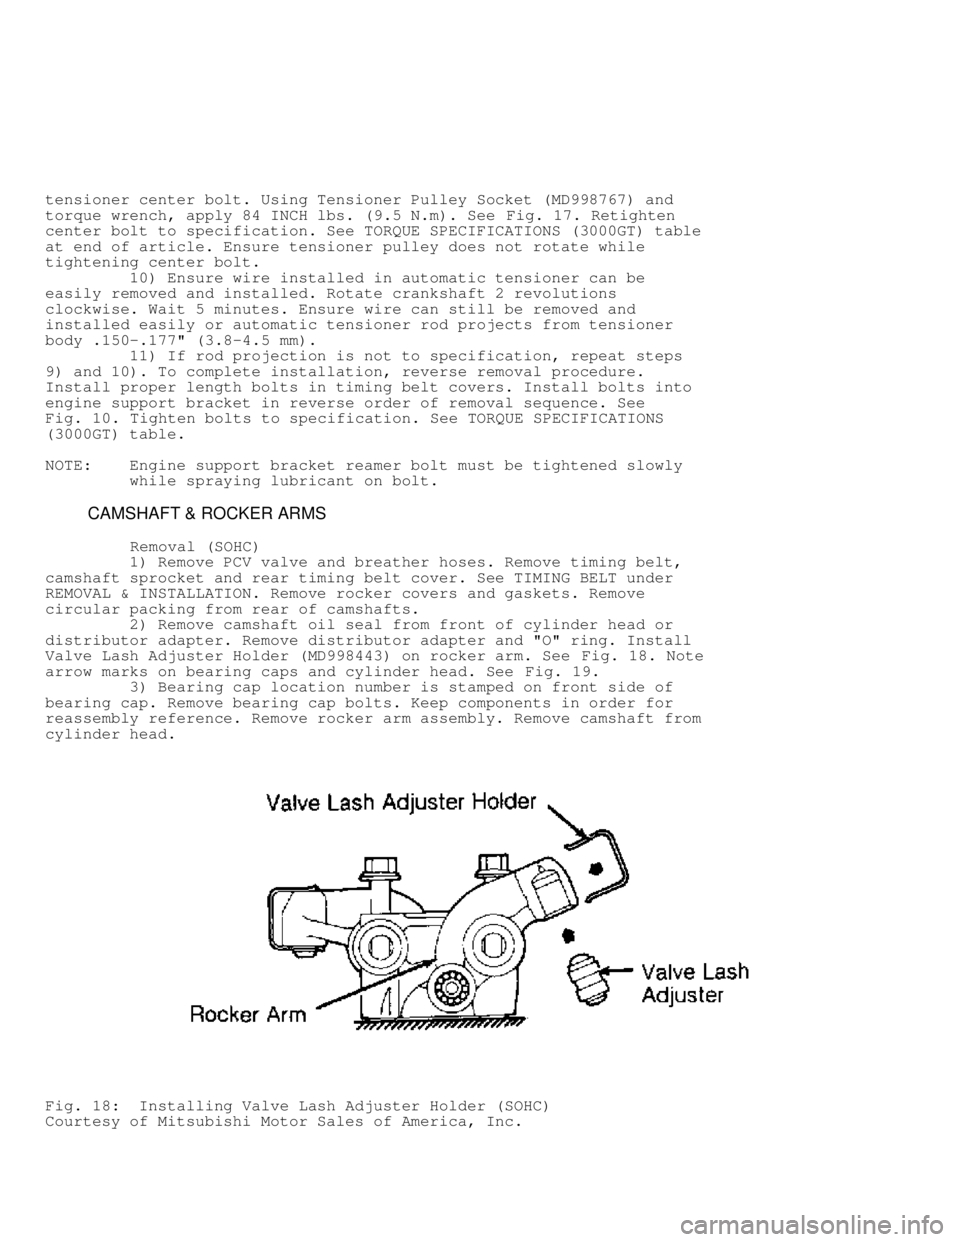 MITSUBISHI MONTERO 1991  Service Manual tensioner center bolt. Using Tensioner Pulley Socket (MD998767) and
torque wrench, apply 84 INCH lbs. (9.5 N.m). See Fig. 17. Retighten
center bolt to specification. See TORQUE SPECIFICATIONS (3000GT)